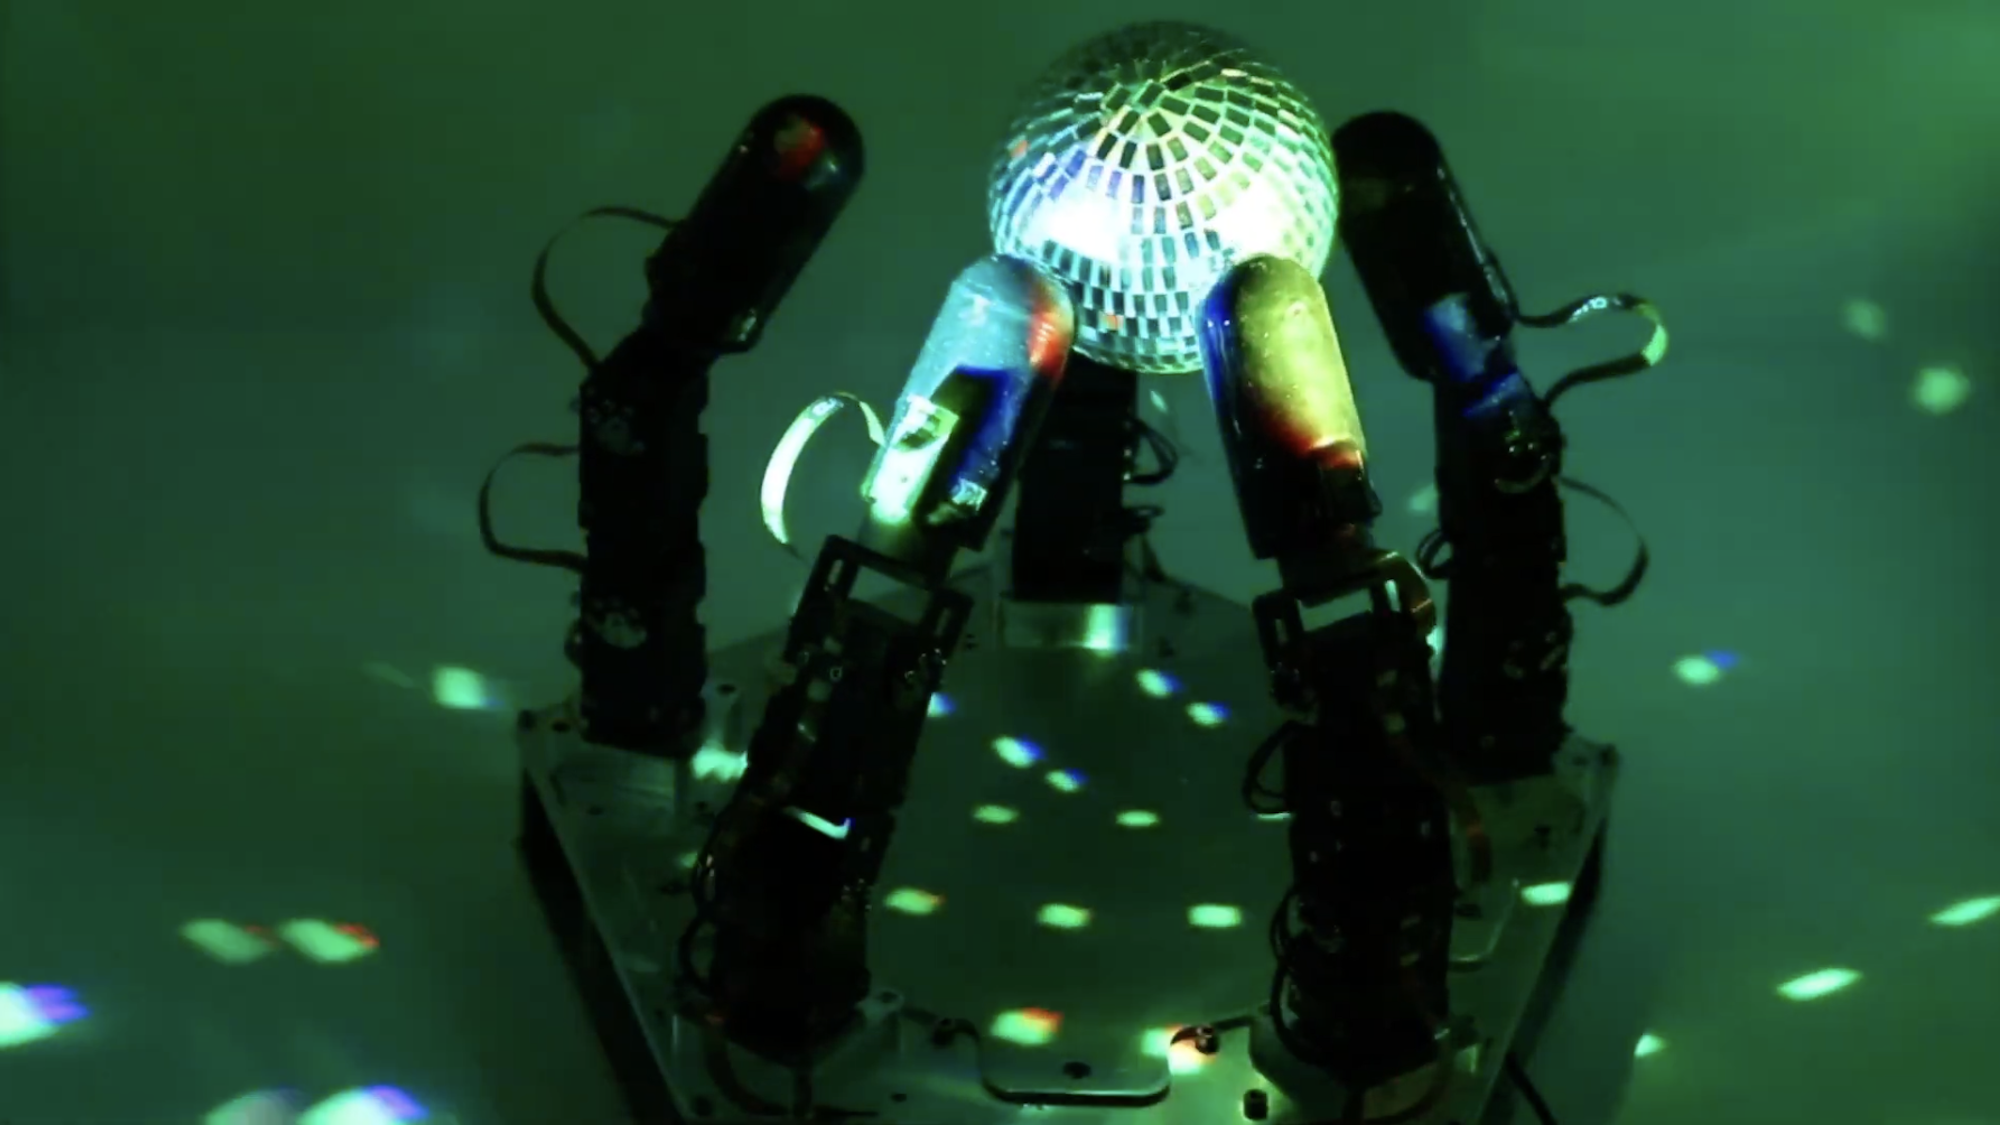 A robotic hand manipulates a reflective disco ball in dim lighting.